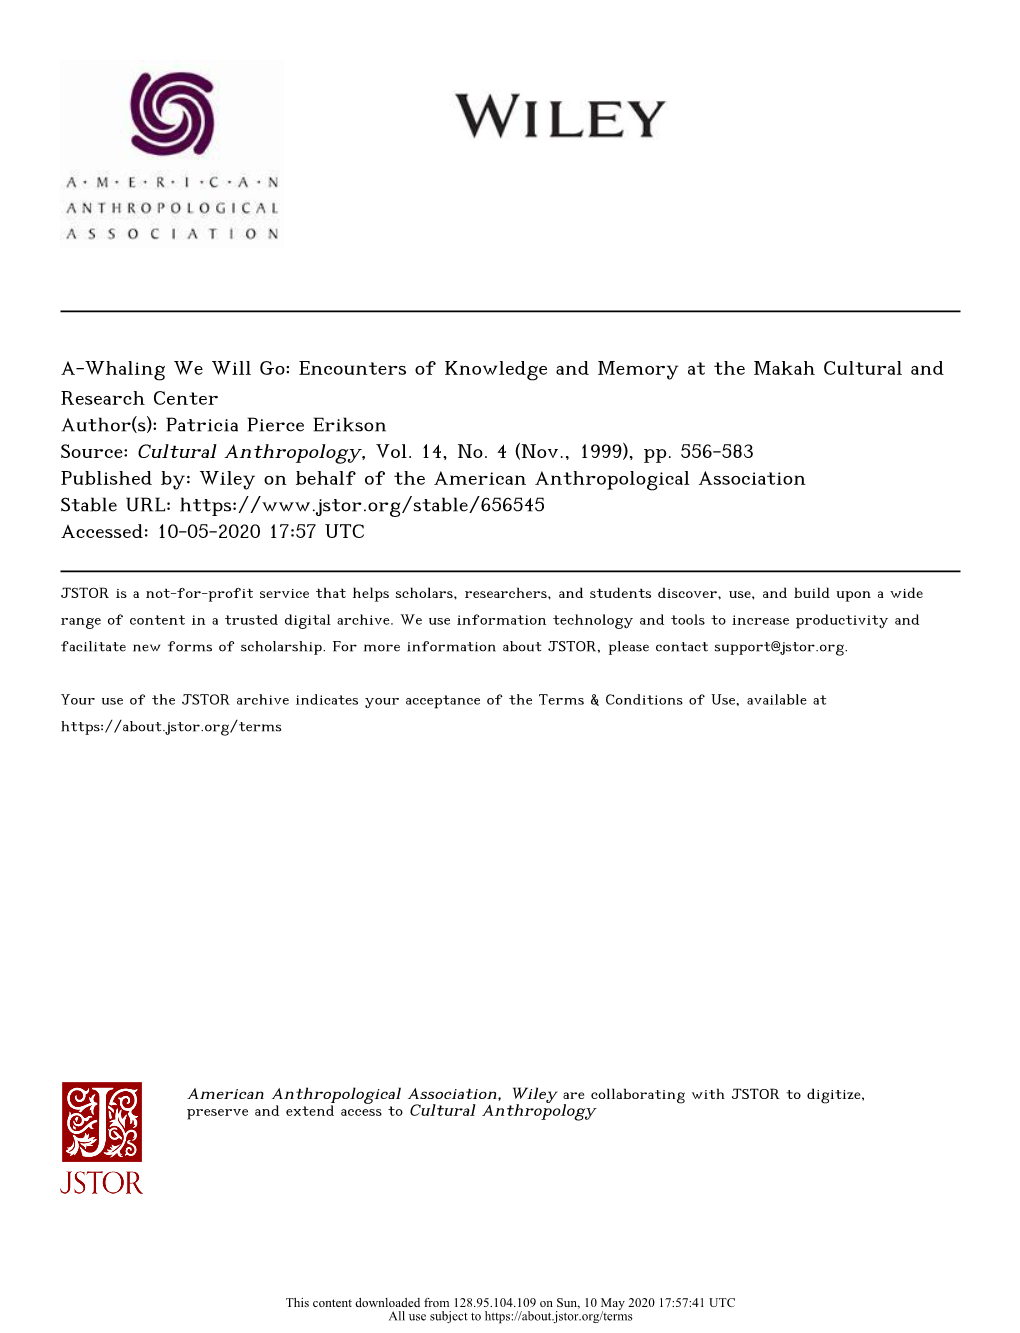 A-Whaling We Will Go: Encounters of Knowledge and Memory at The